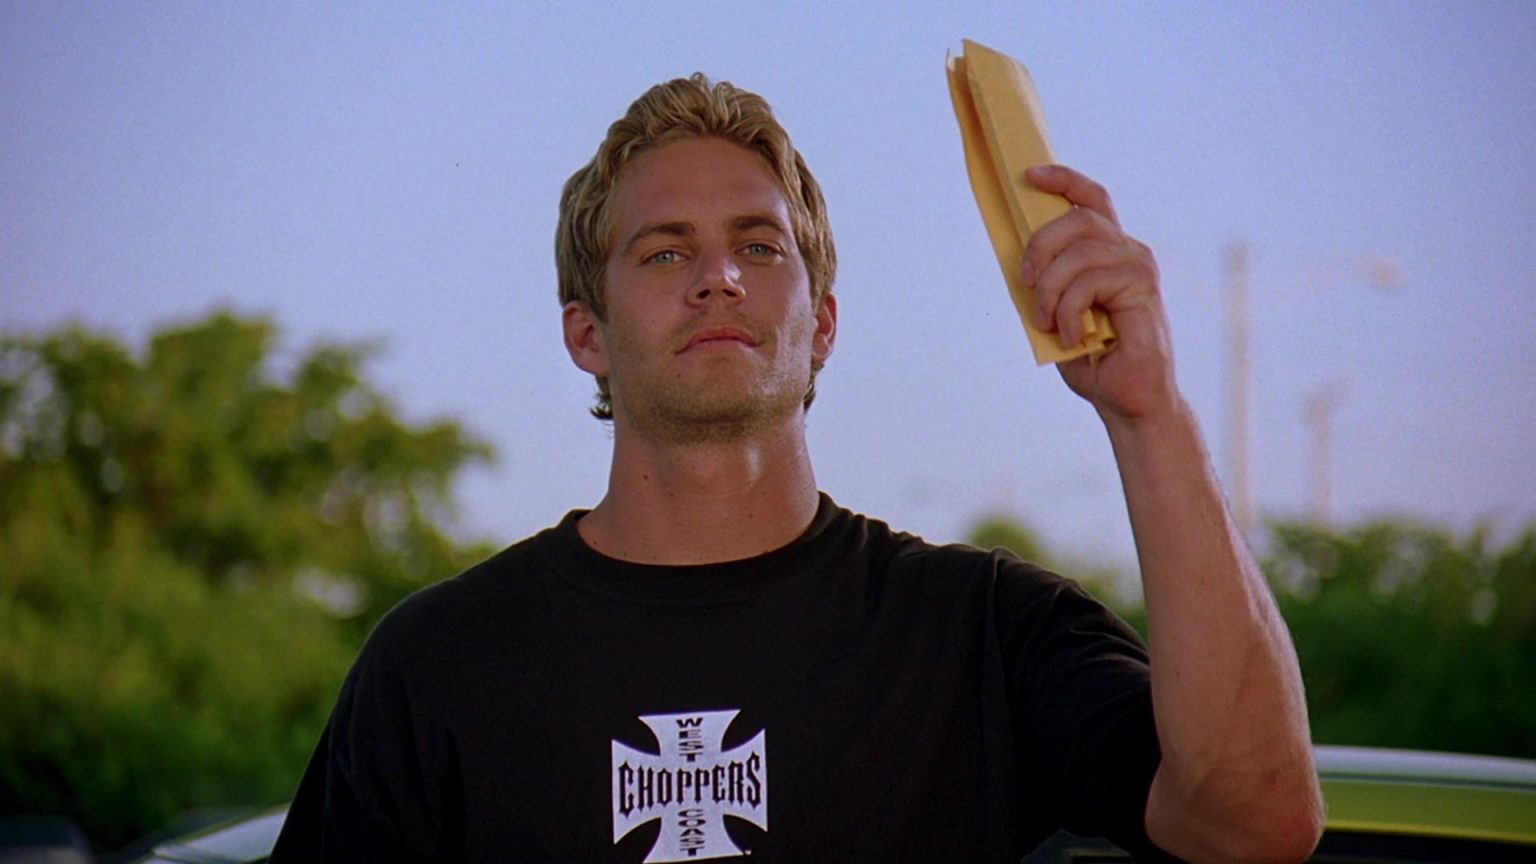 West Coast Choppers T Shirt Worn By Paul Walker As Brian O Conner In 2 Fast 2 Furious 2003